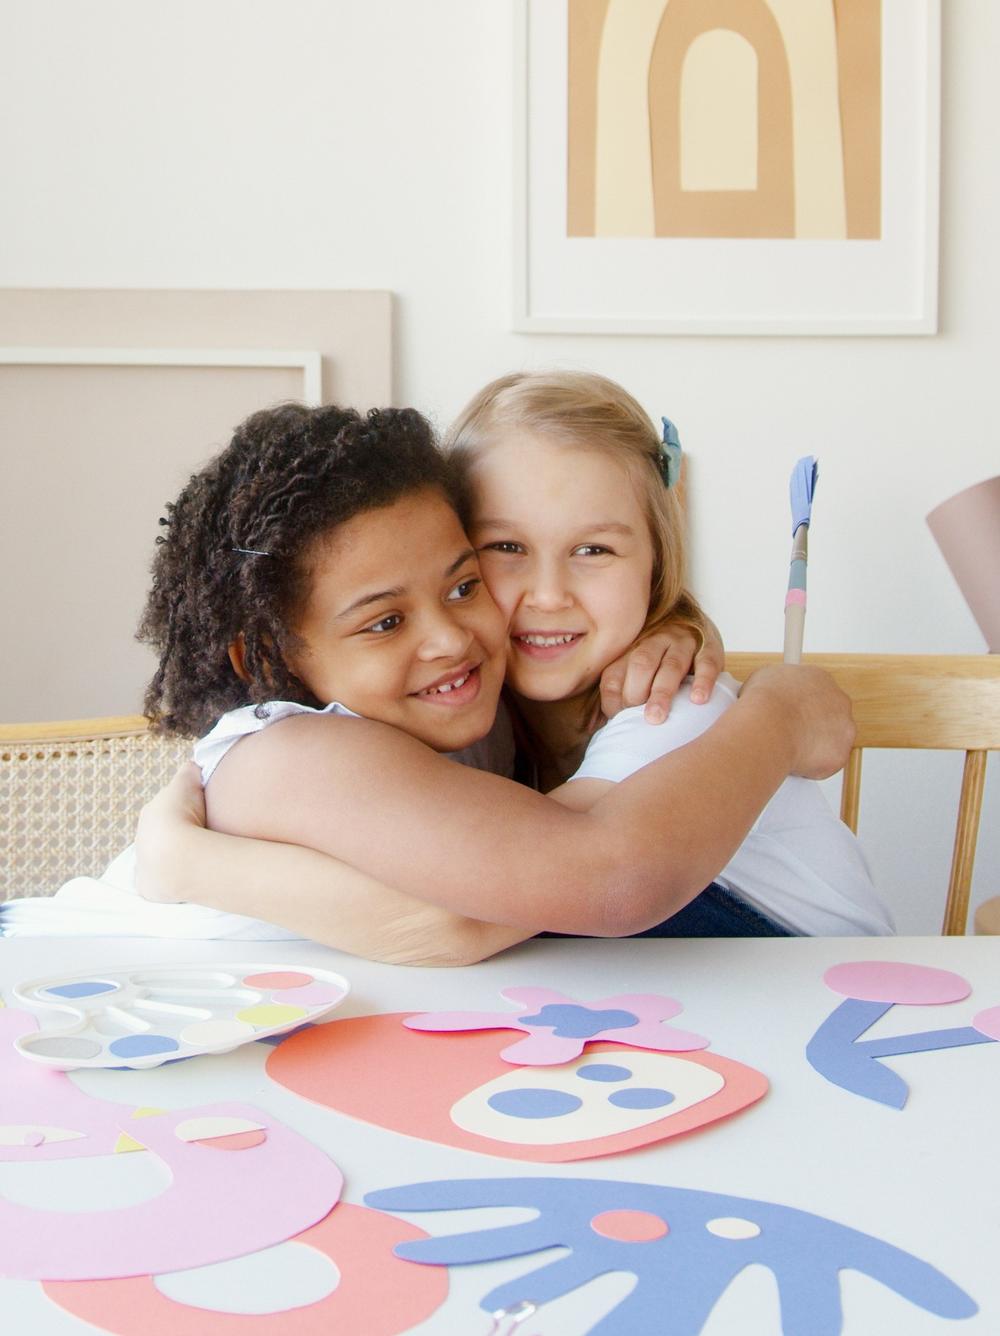 Two young girls smiling and hugging at an arts and crafts table.